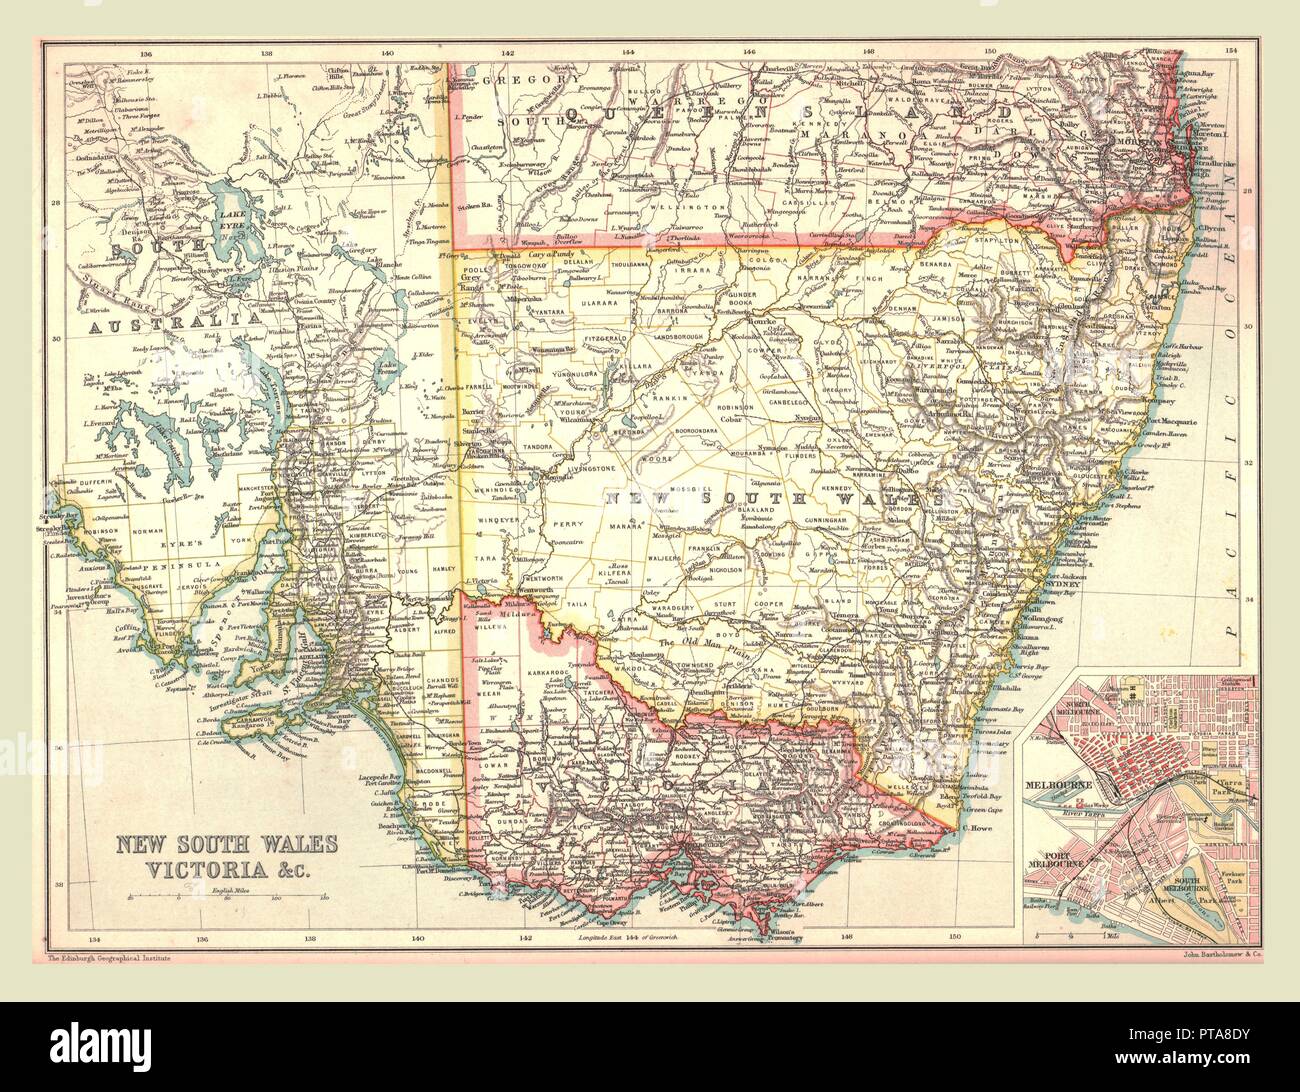 Map Of New South Wales And Victoria 1902 Creator Unknown PTA8DY 